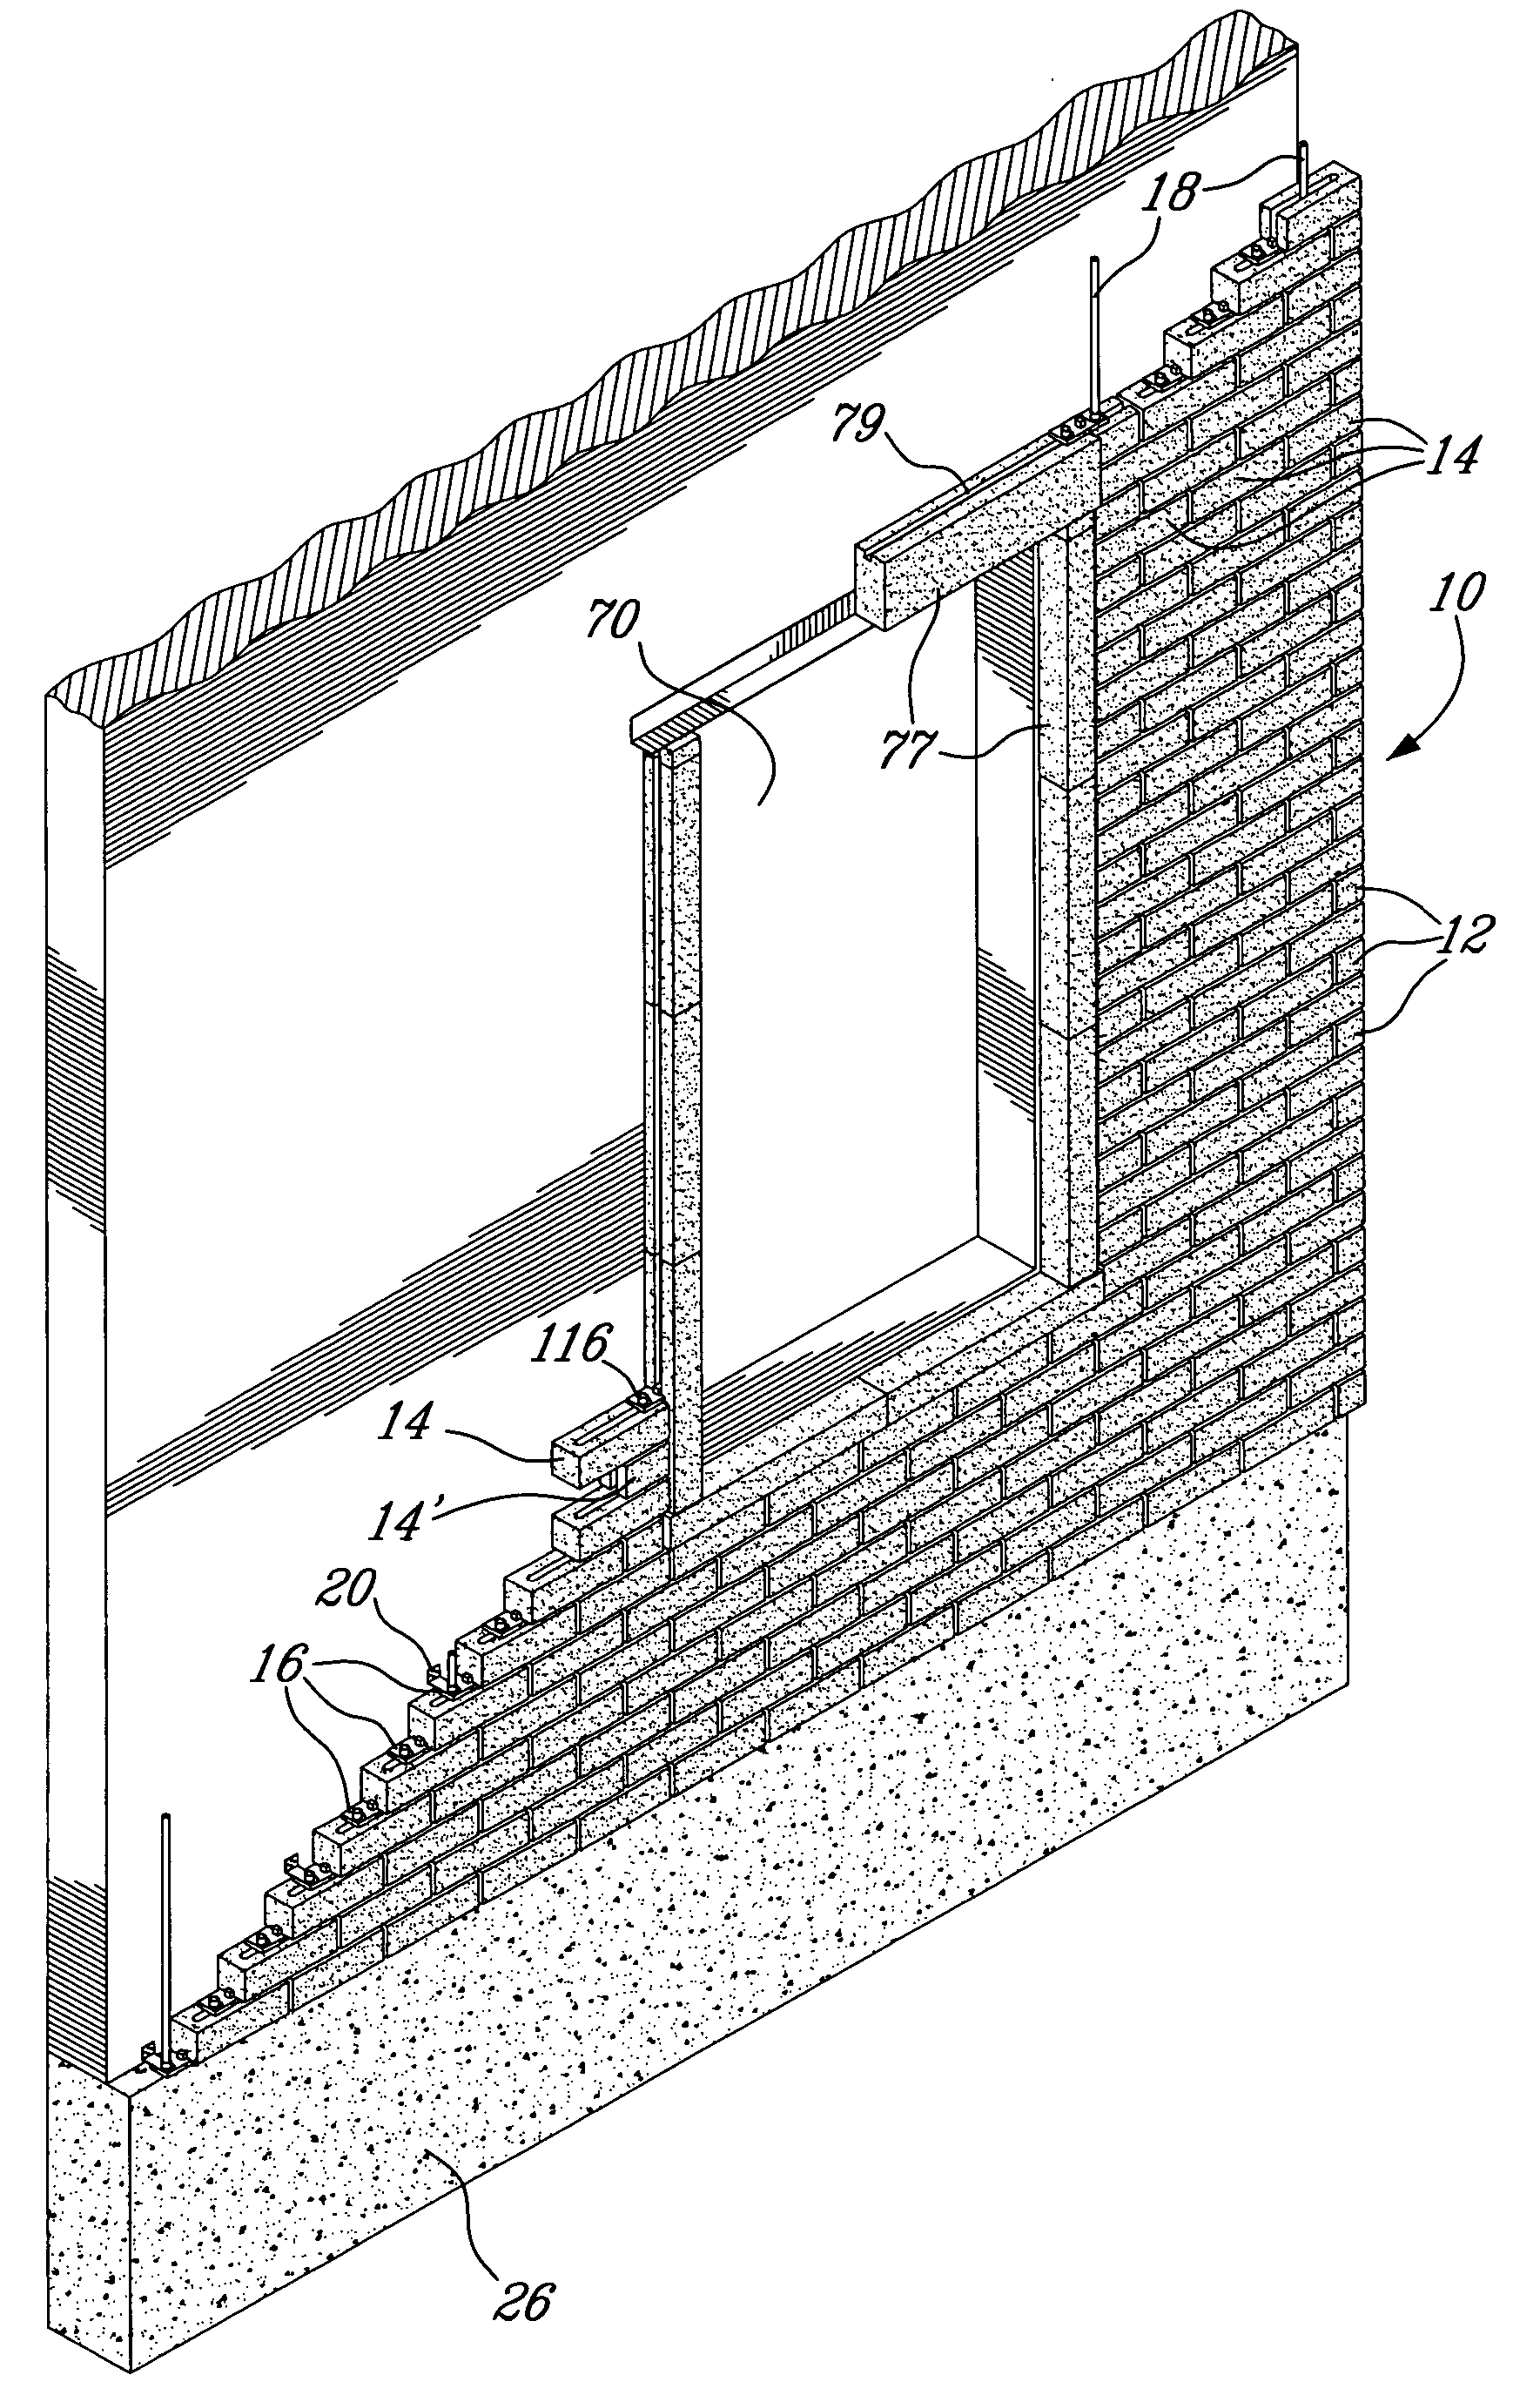 Method and implements for erecting walls including a plurality of wall components